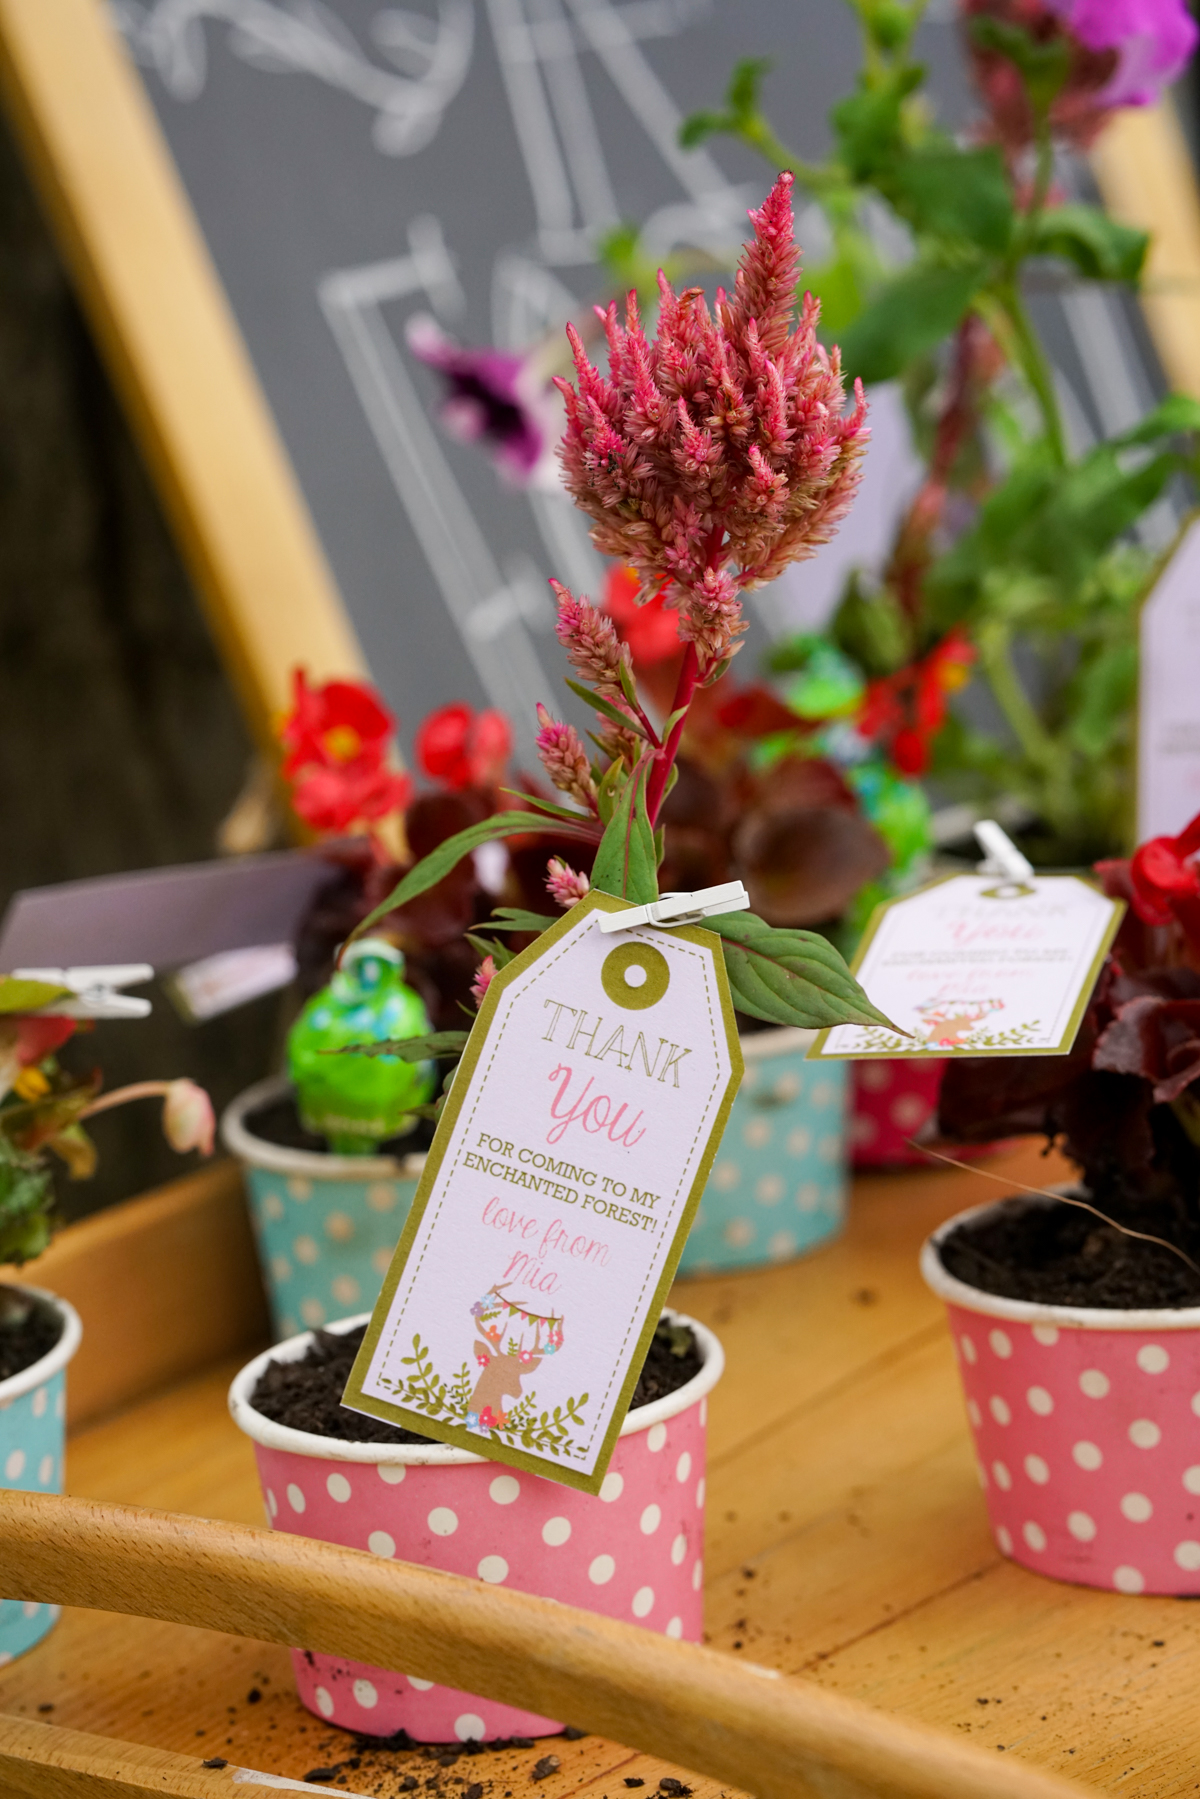 Boho Enchanted Forest Party Favor Ideas of a plant with a editable favor tag attached with a white peg